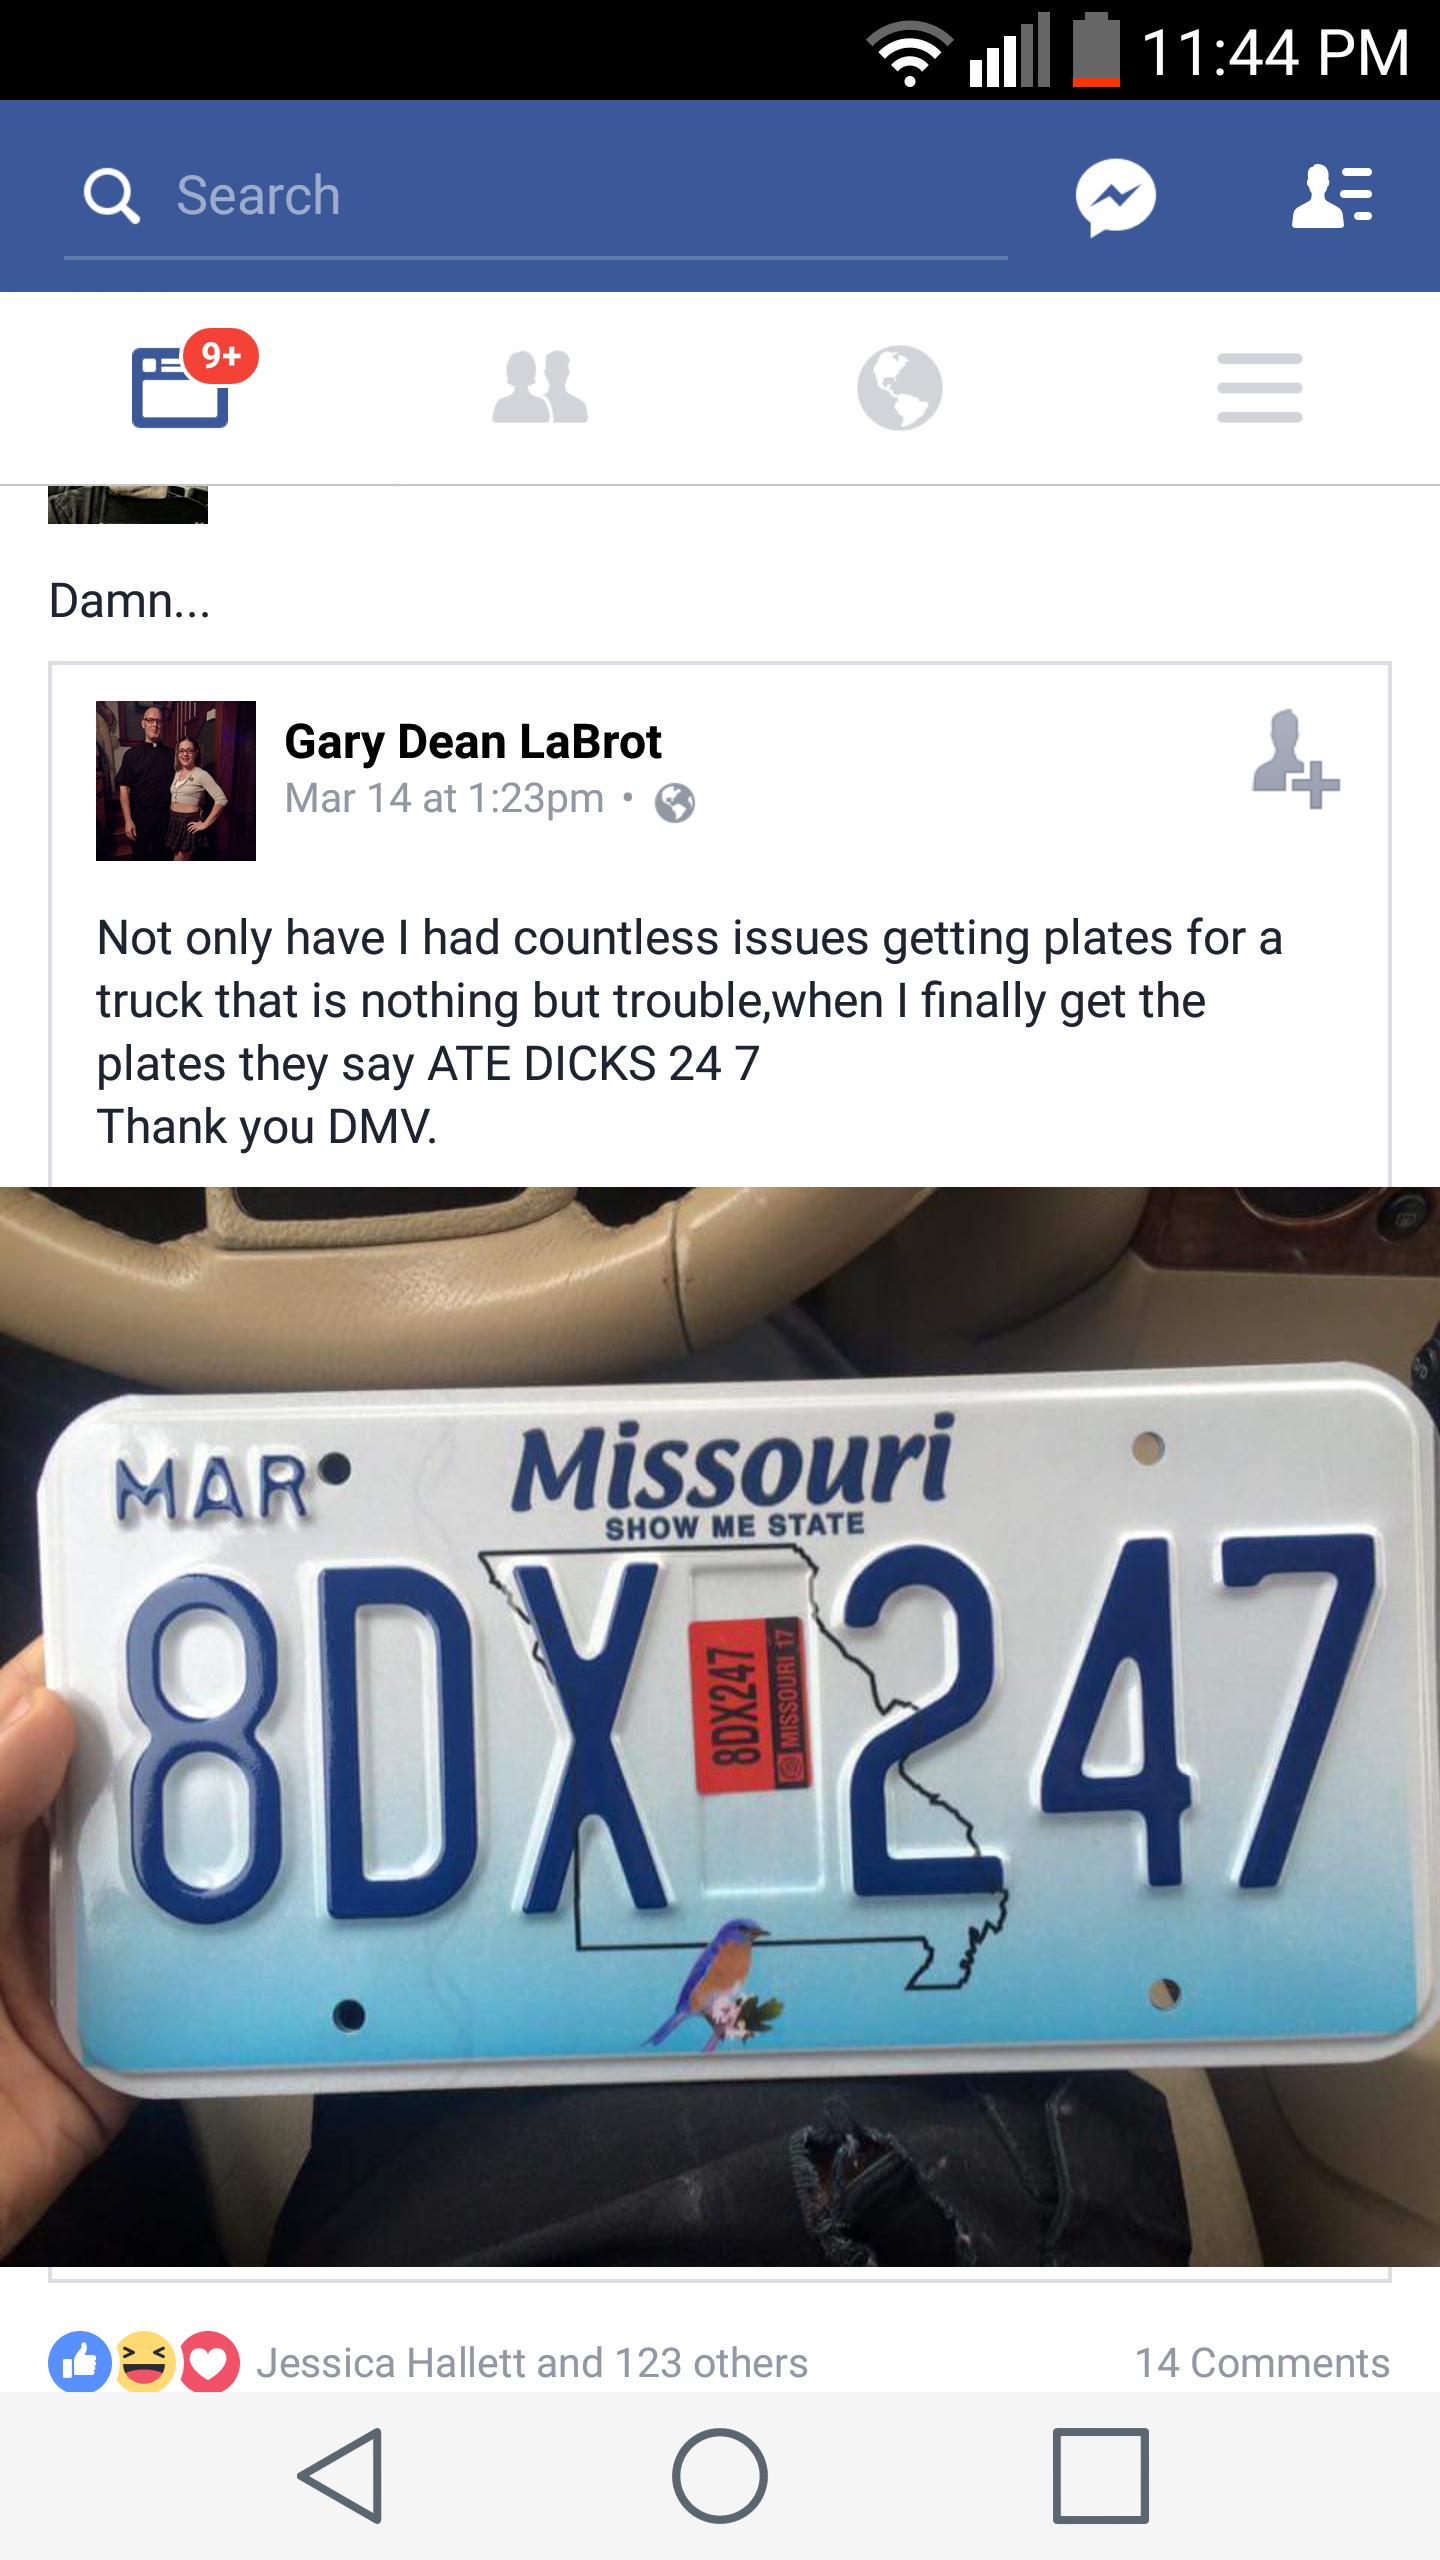 software - Jul Q Search Damn... Gary Dean LaBrot Mar 14 at pm Not only have I had countless issues getting plates for a truck that is nothing but trouble,when I finally get the plates they say Ate Dicks 24 7 Thank you Dmv. Mar Missouri Show Me State 8DX24